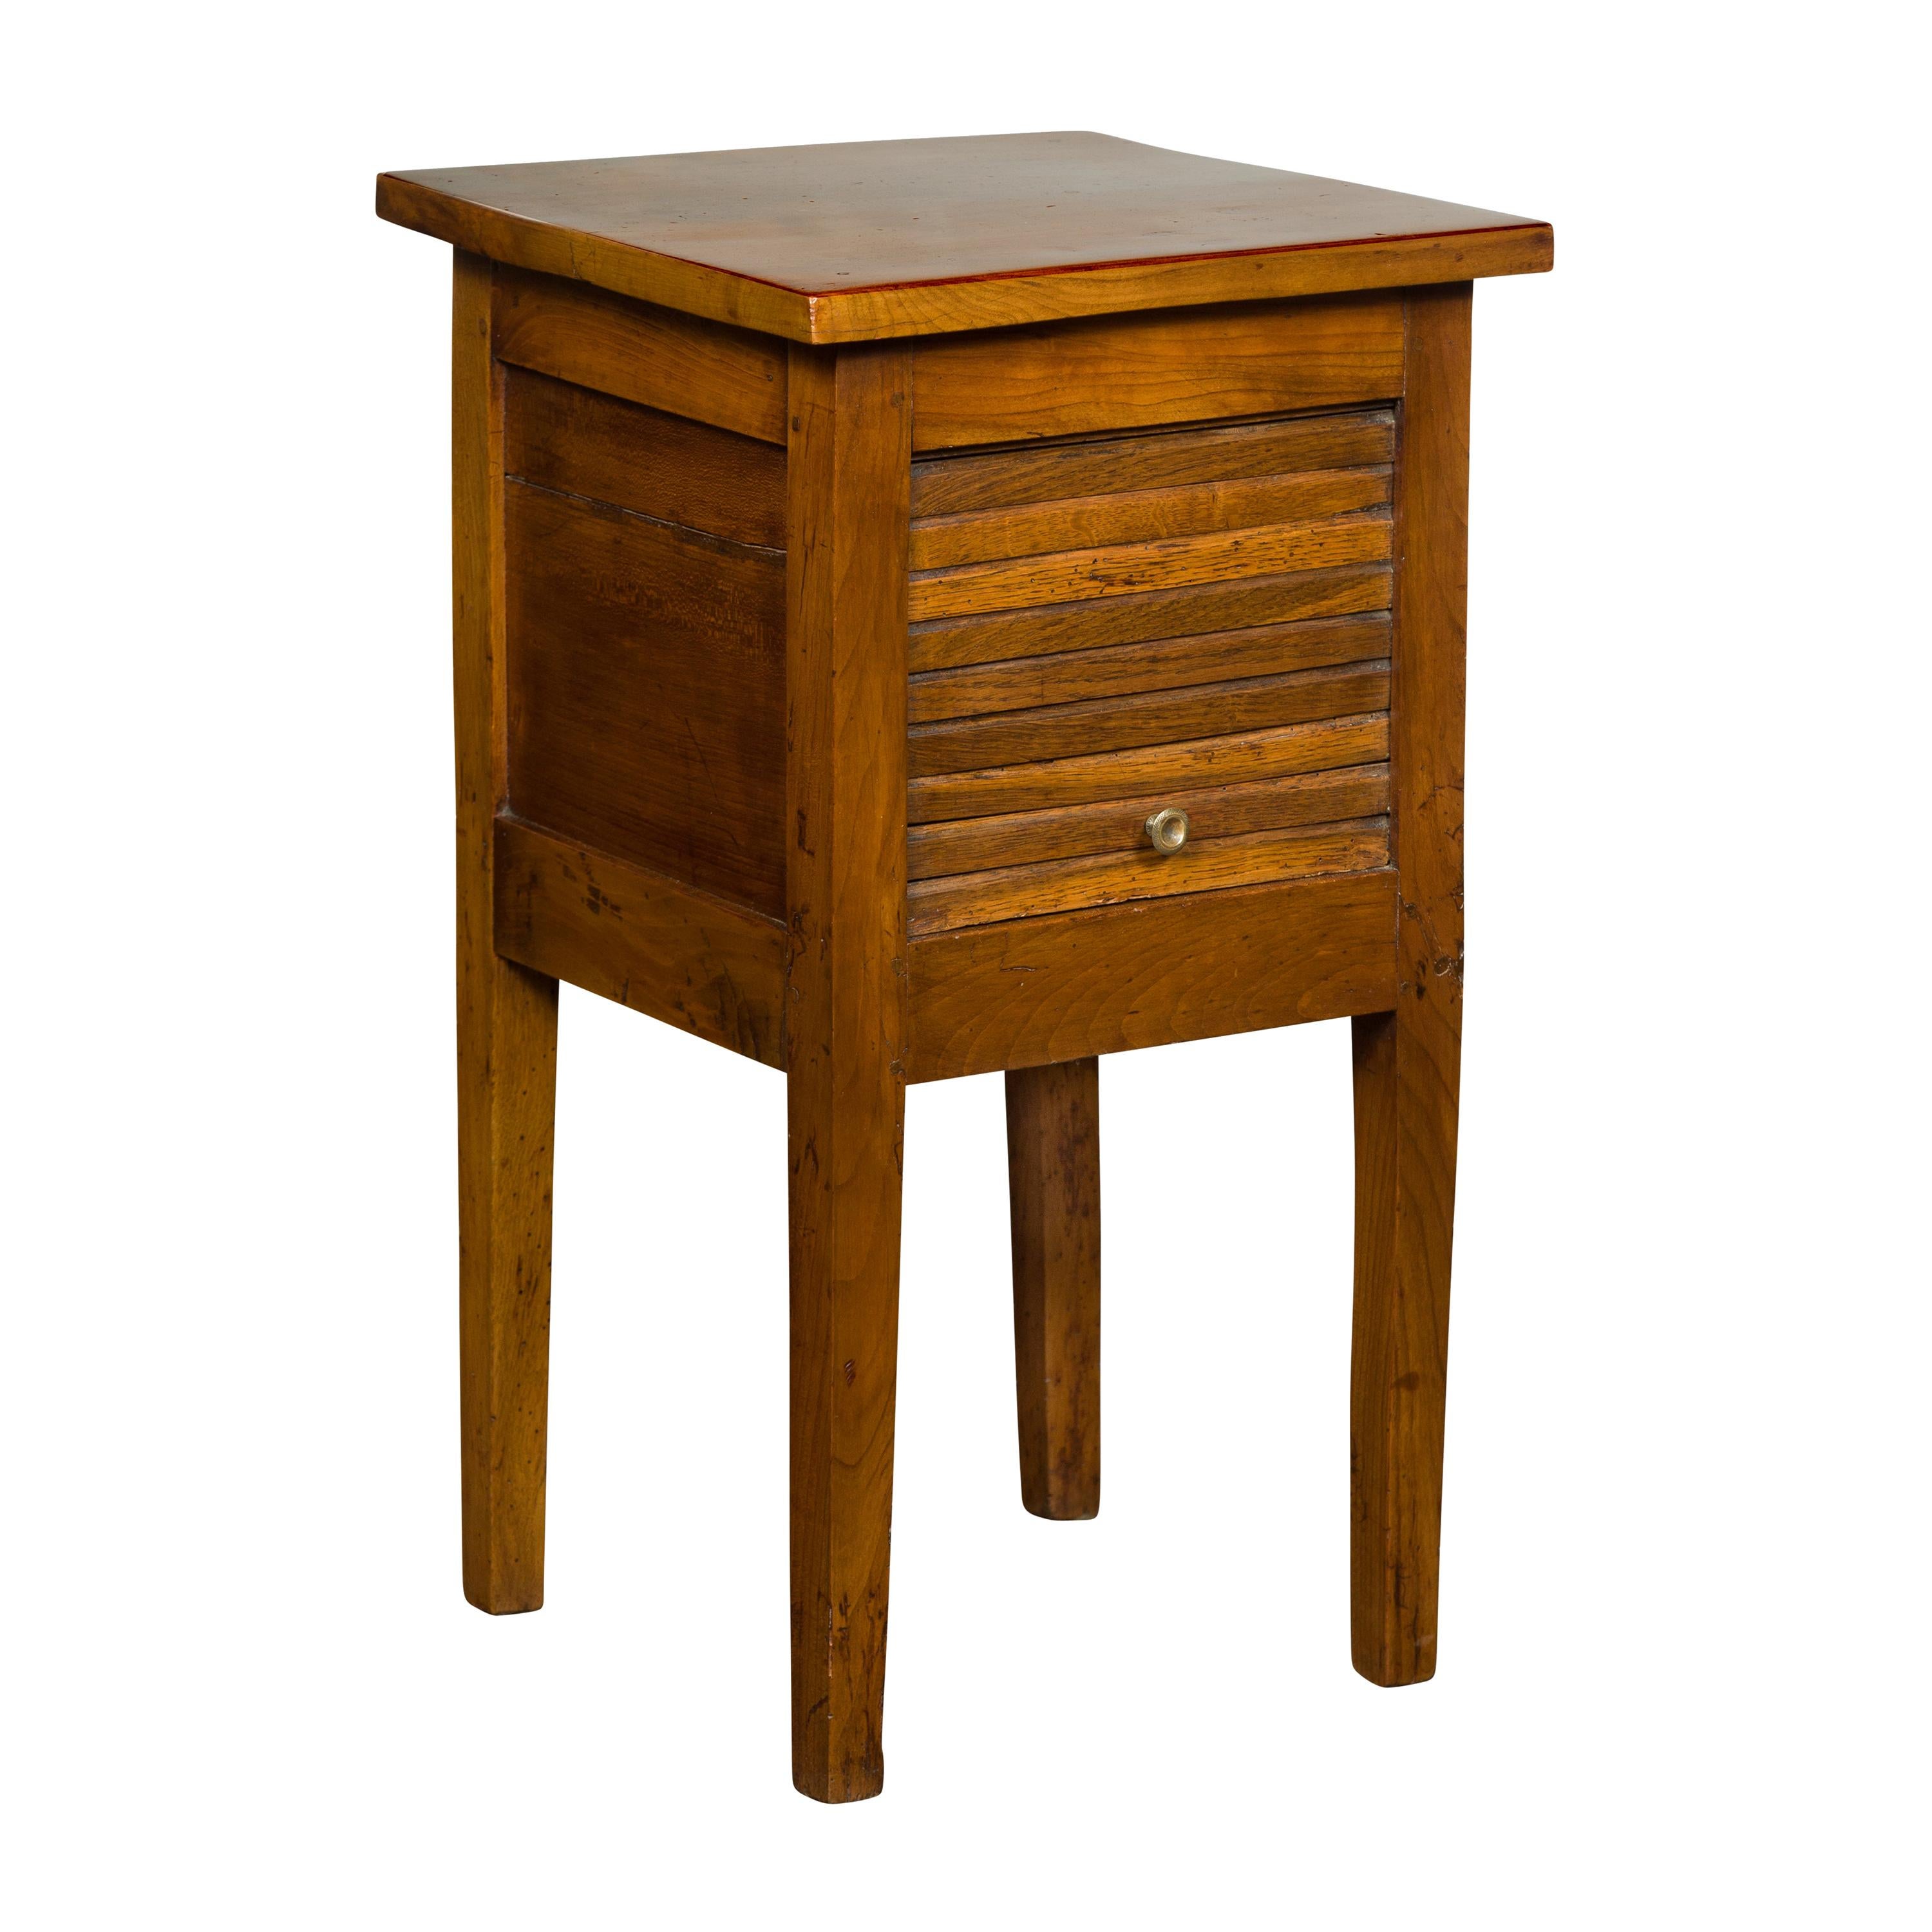 Petite French 1870s Walnut Side Table with Tambour Door and Tapering Legs